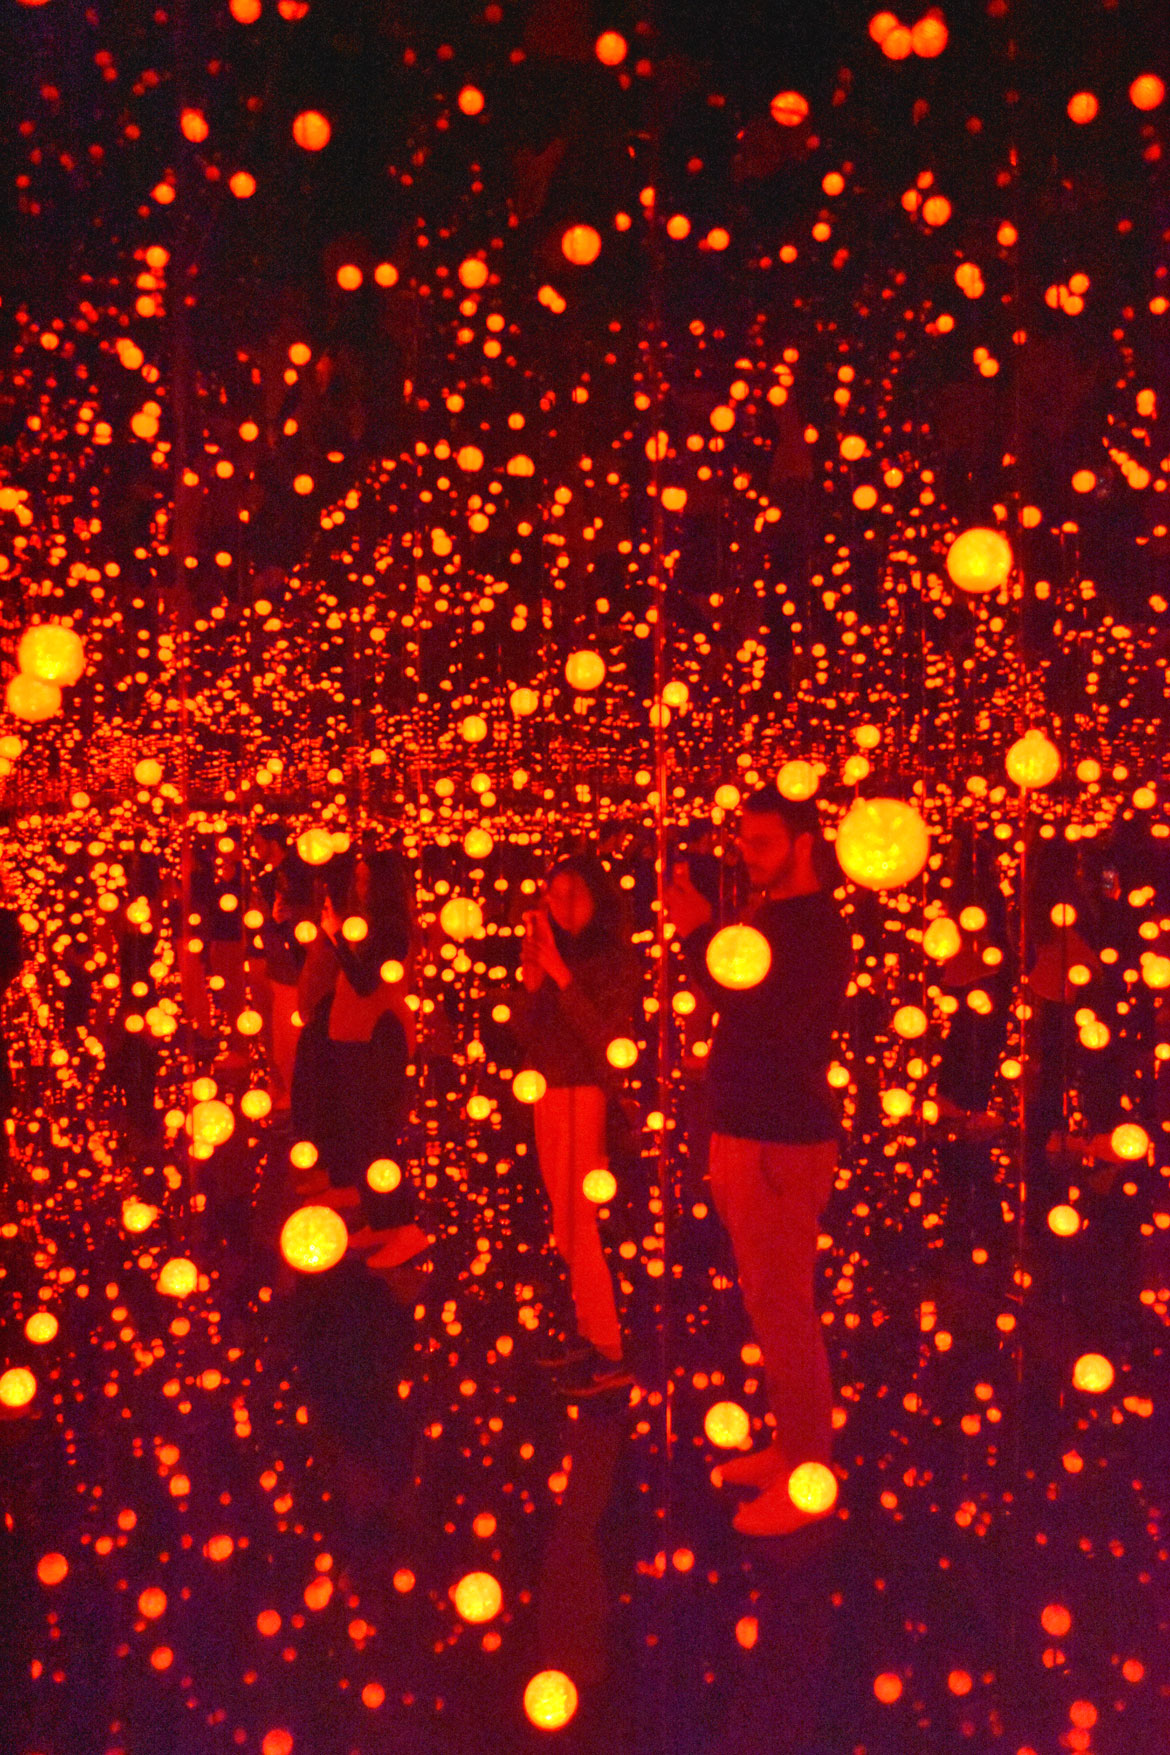 Two Yayoi Kusama Exhibits In New York Offer An Overview Of